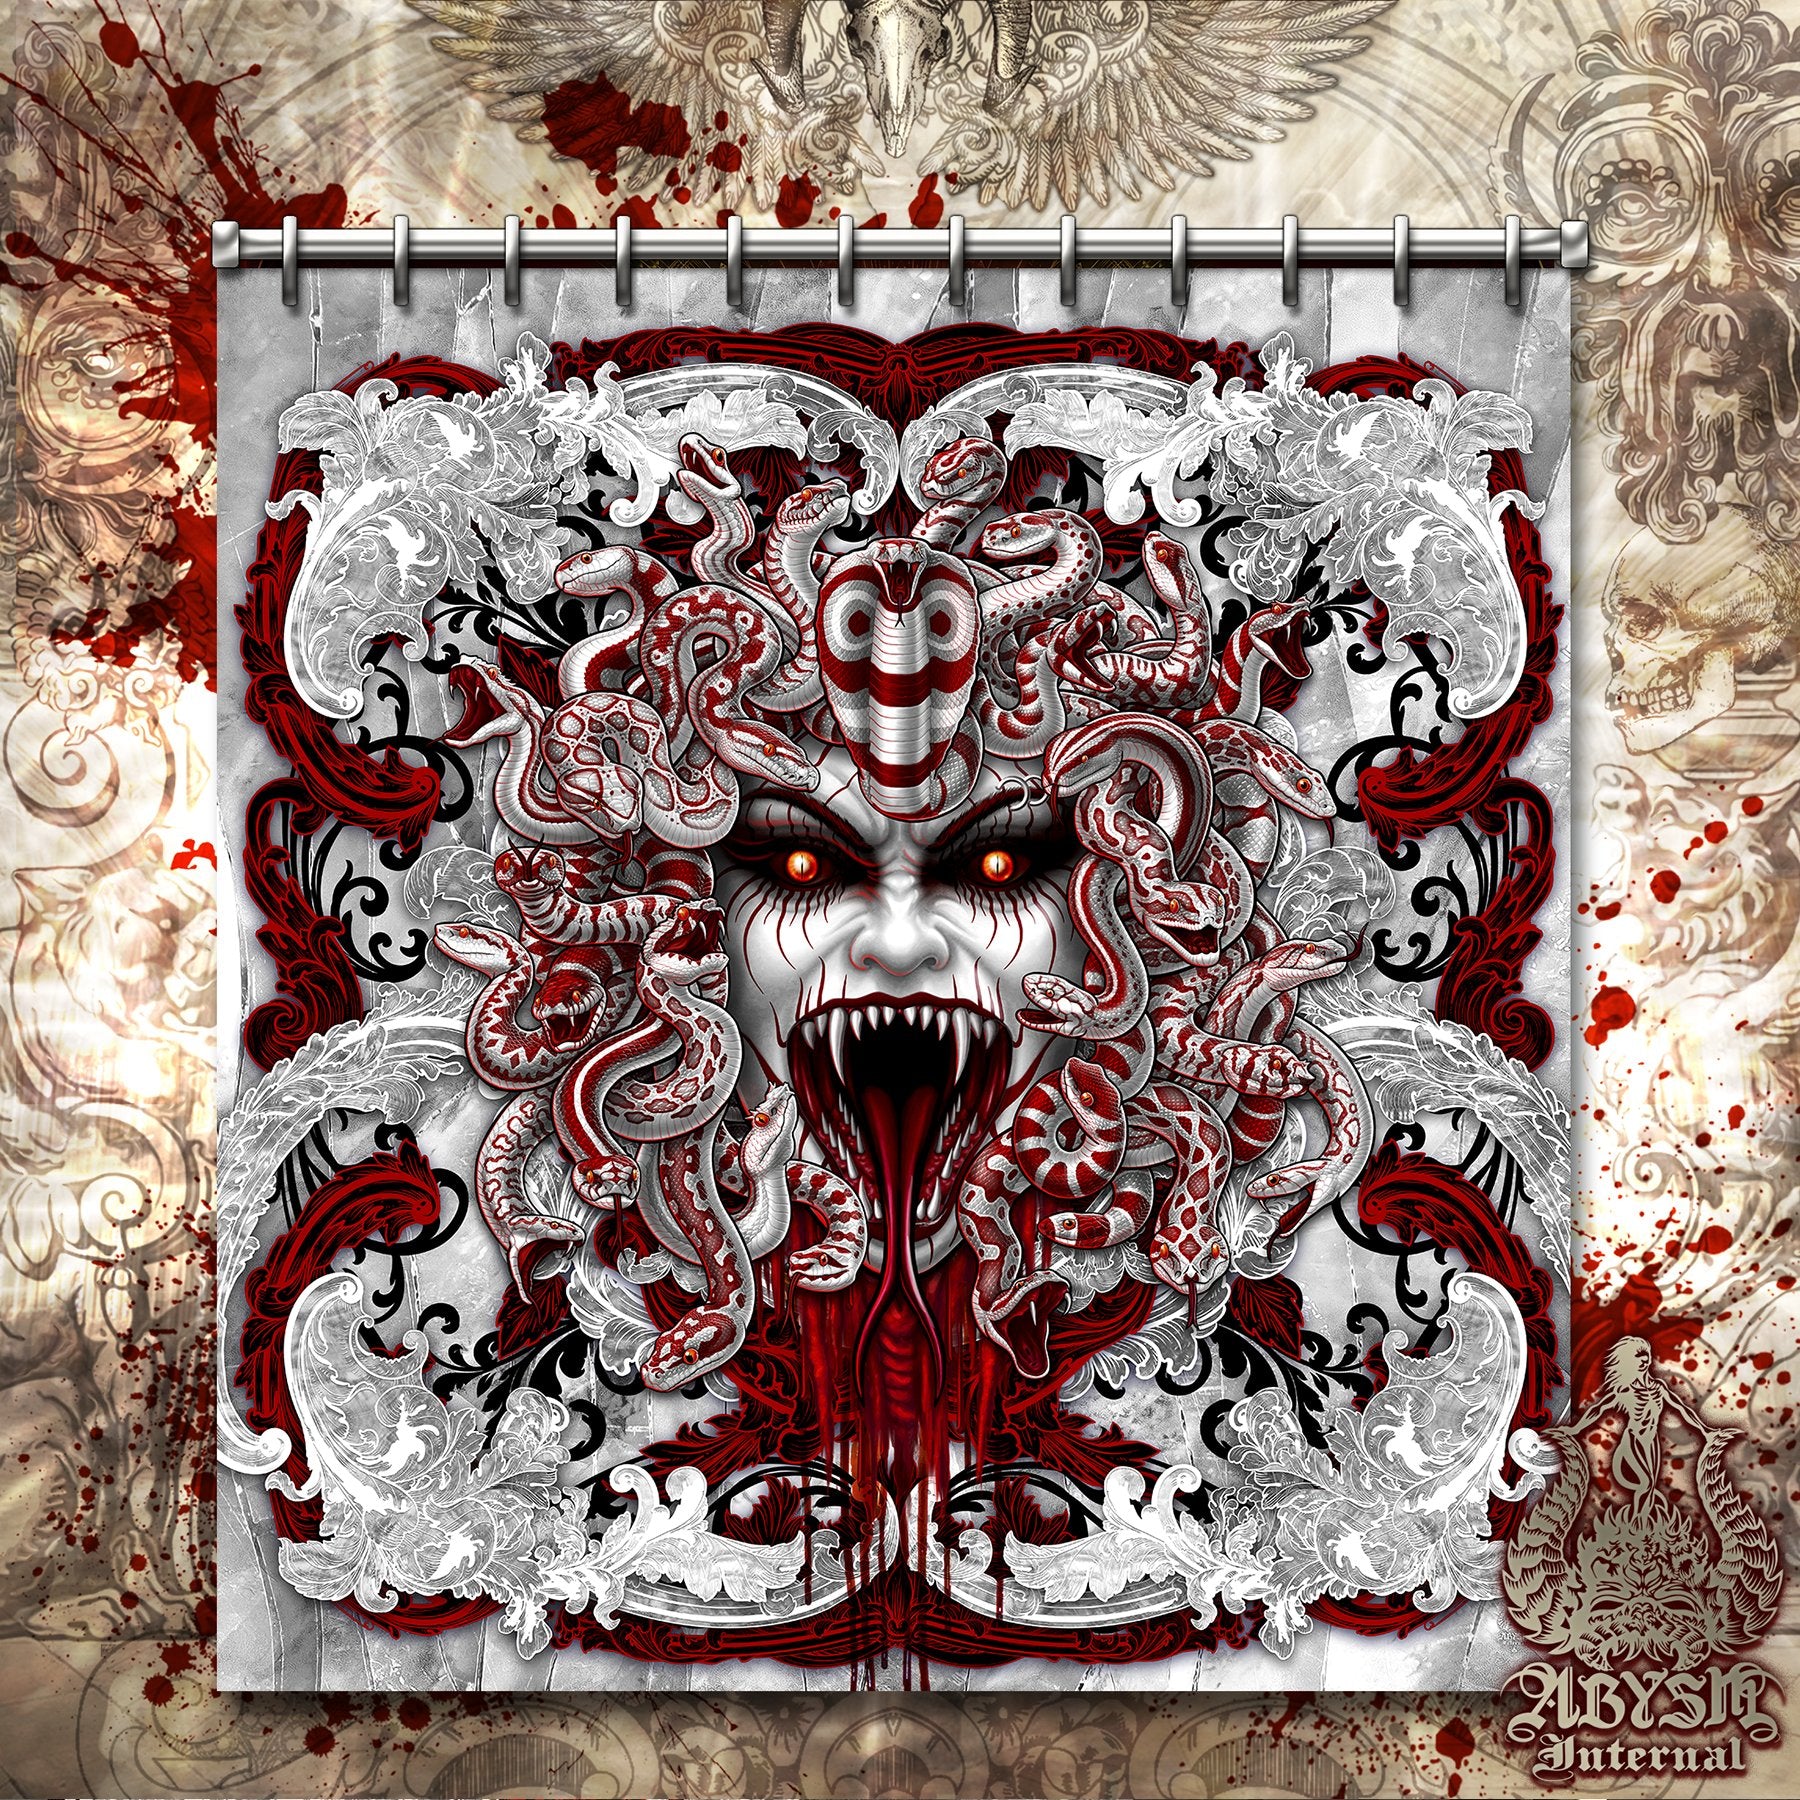 Skull Shower Curtain, 71x74 inches, Gothic Bathroom Decor, White Goth - Bloody Red Medusa, 4 Faces - Abysm Internal